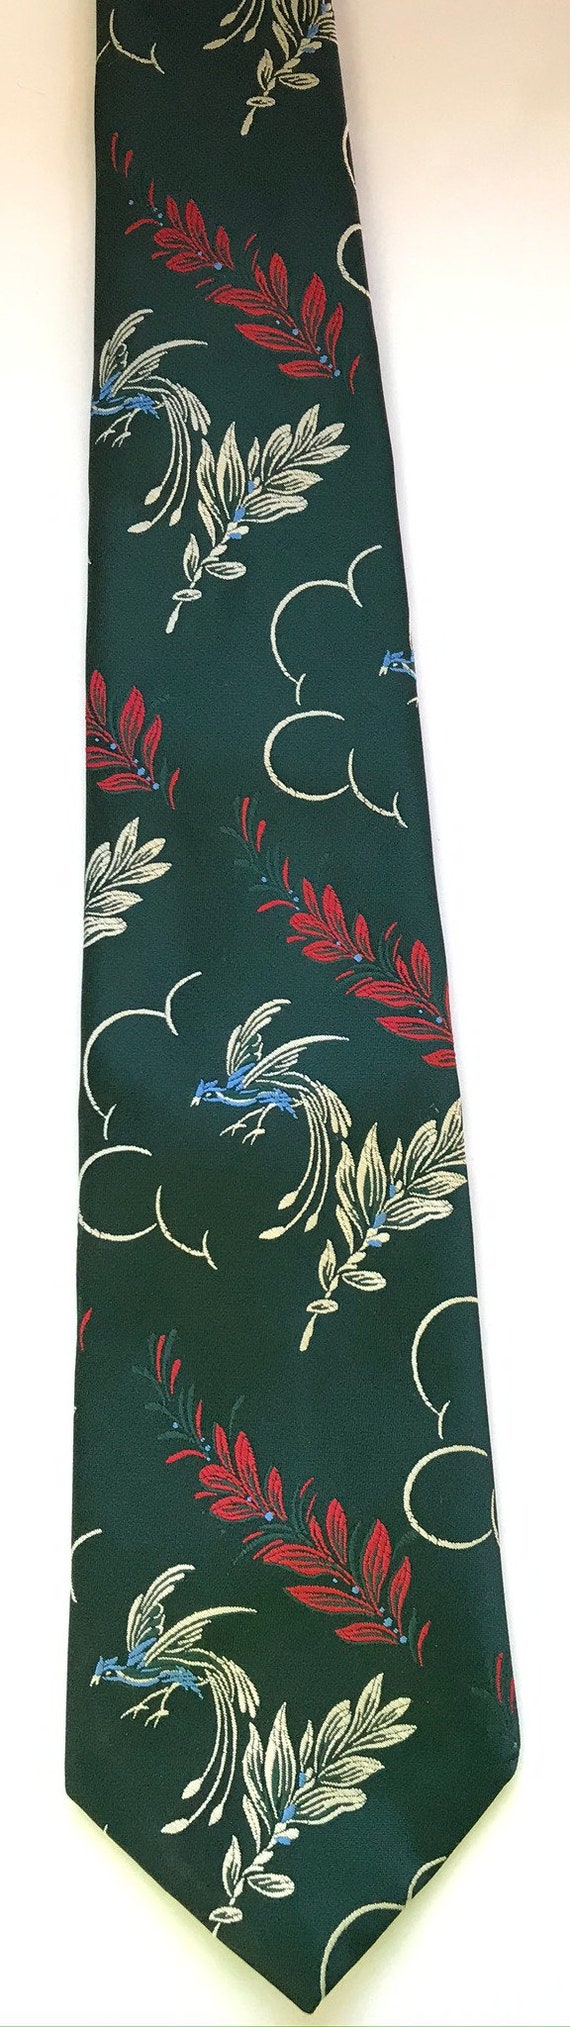 70s Floral Birds Tie, Green Red & White Flowered … - image 2